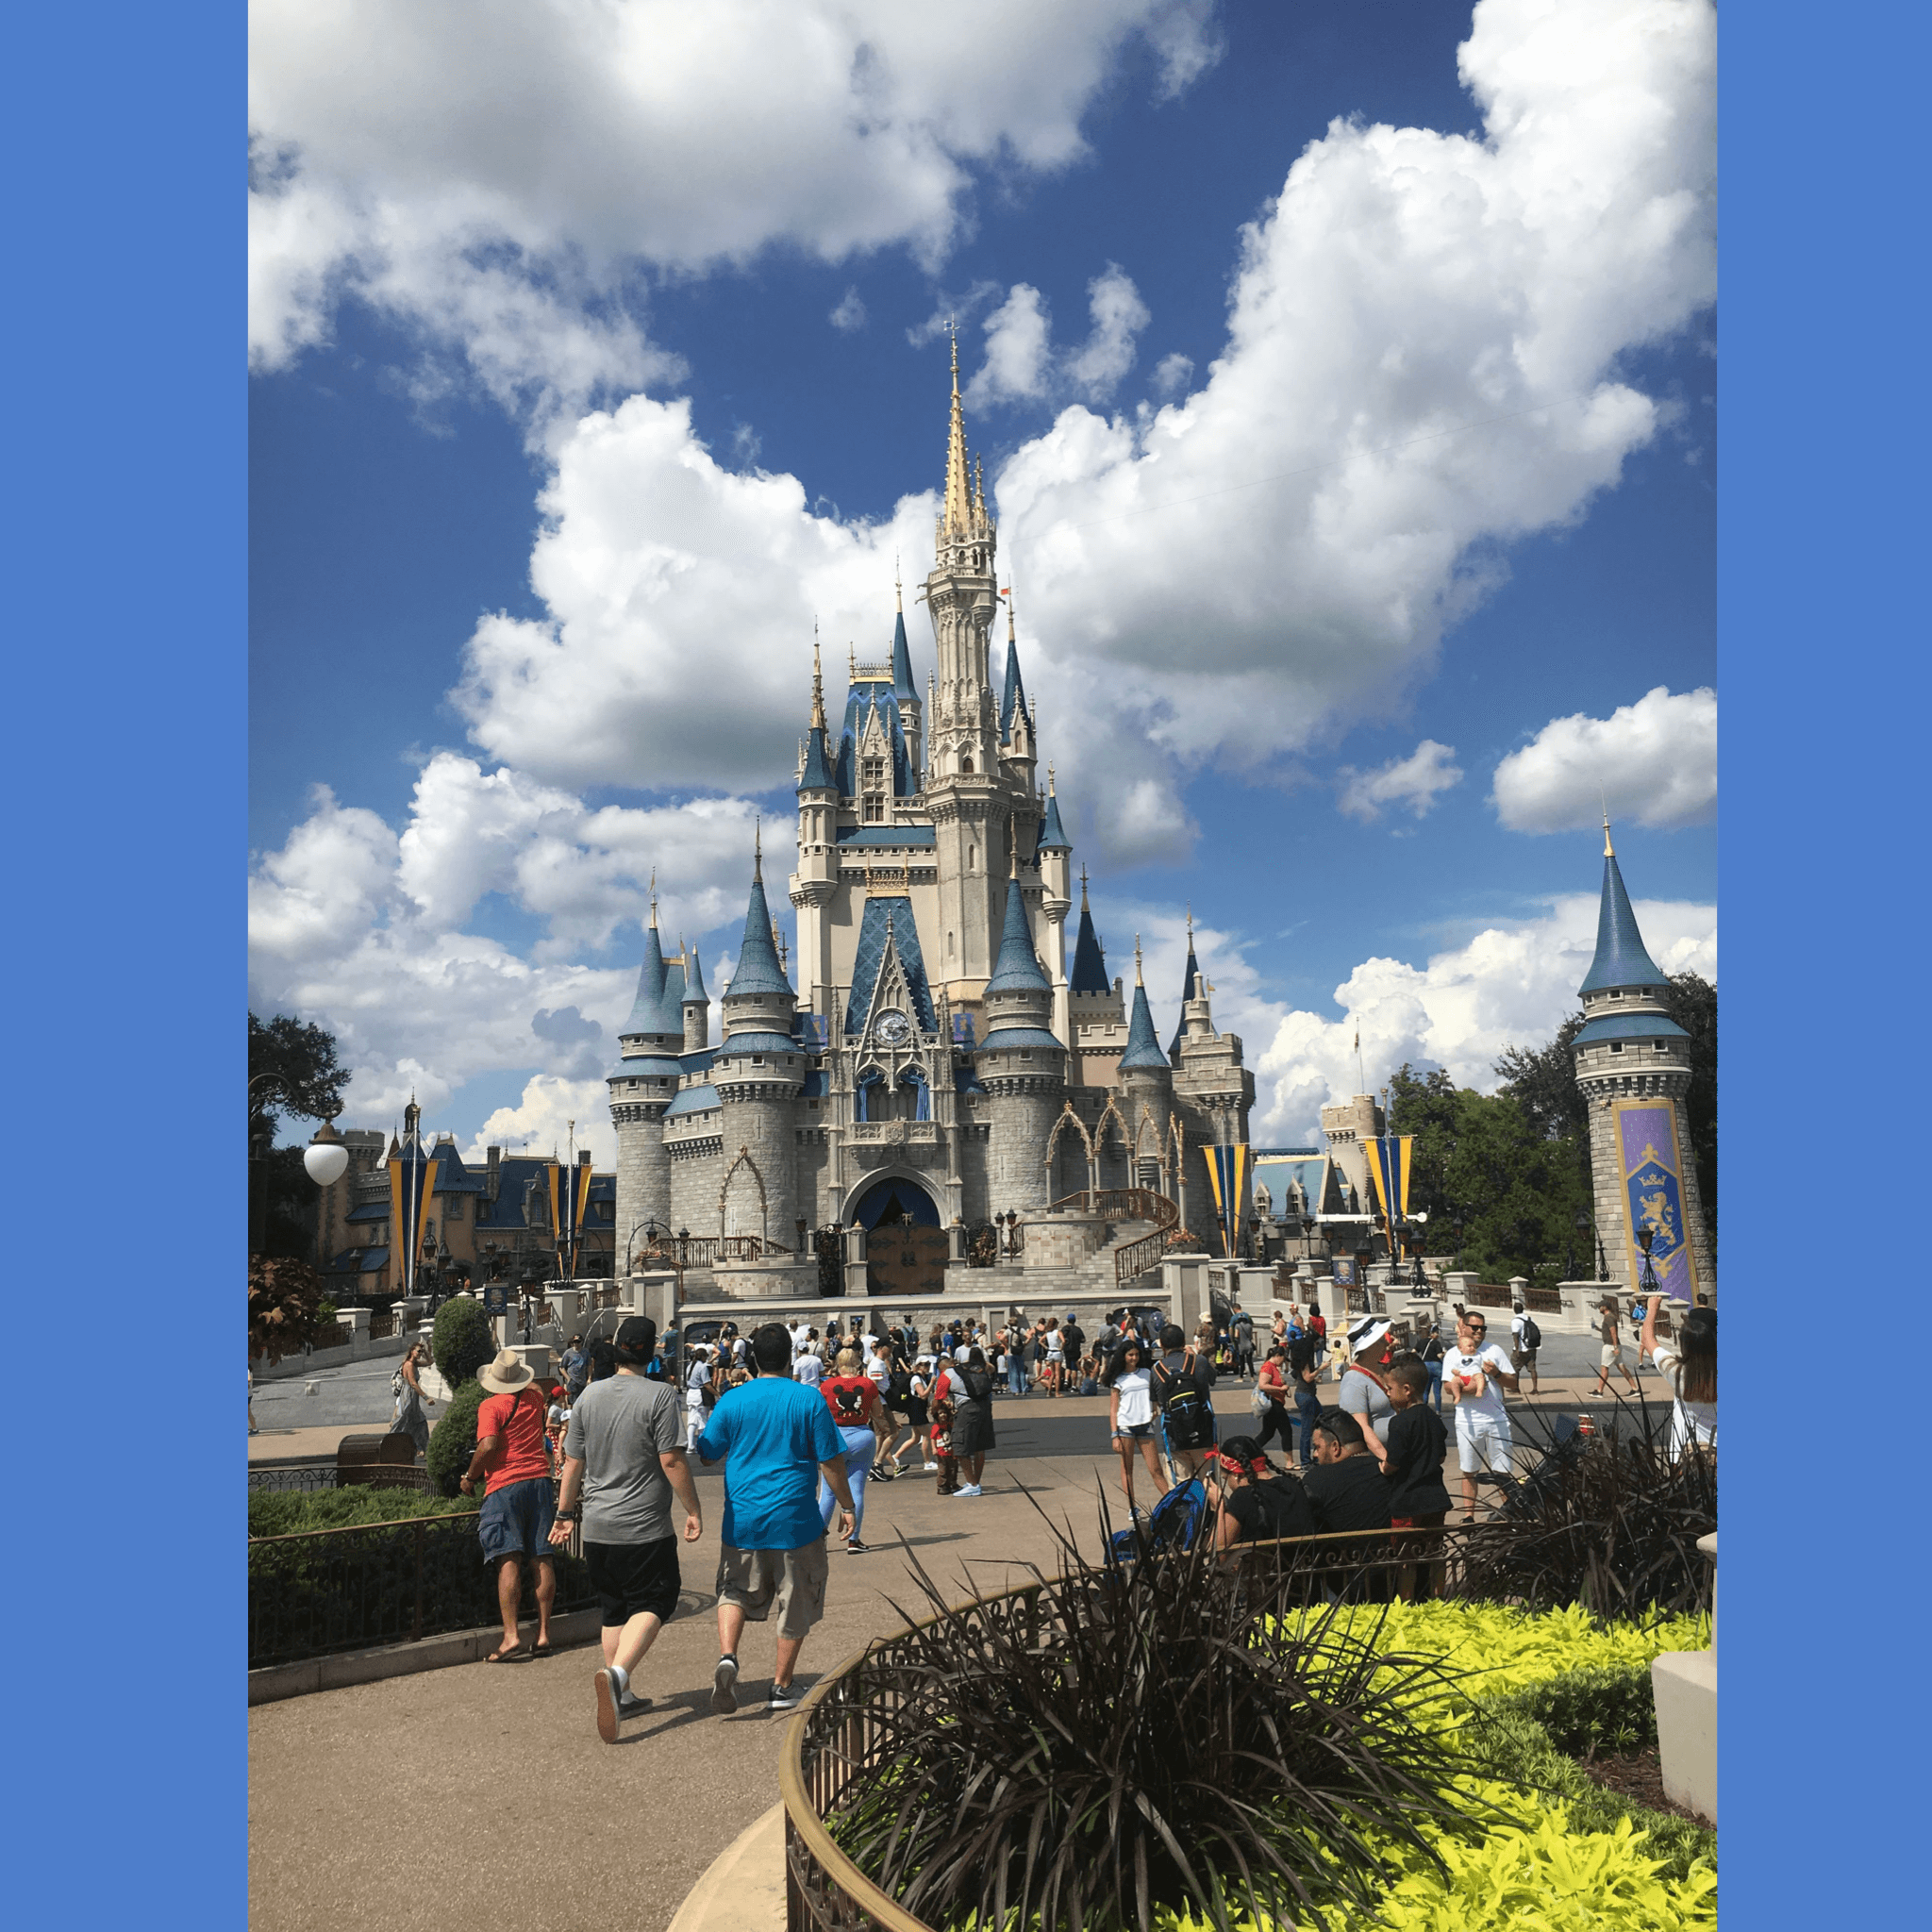 Disney World Resort: What to expect now that it has reopened